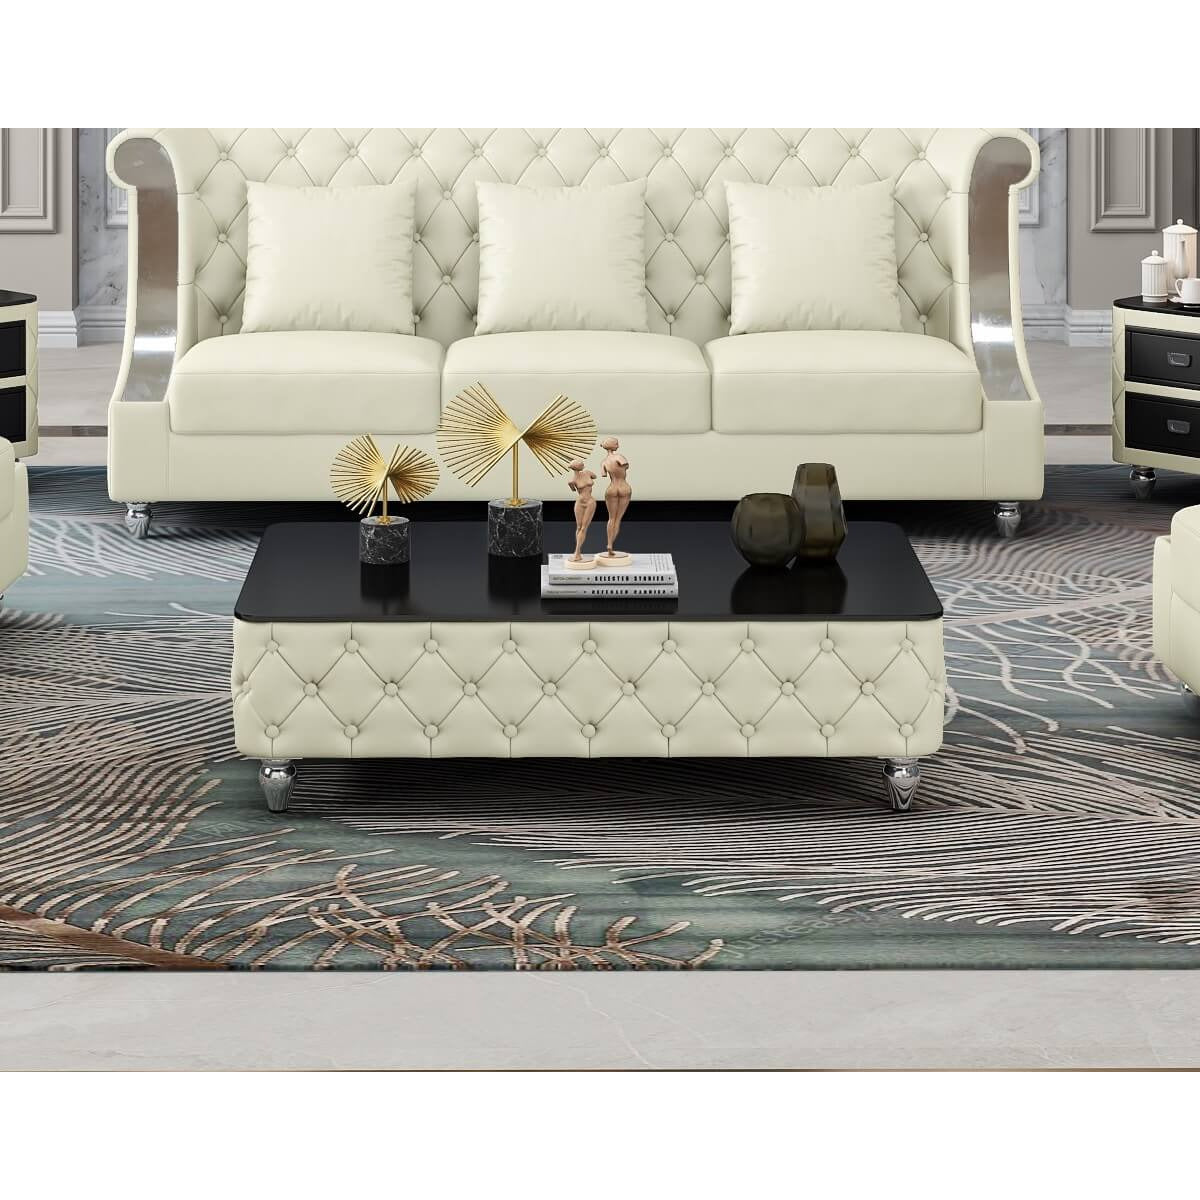 European Furniture - Mayfair Coffee Table Off White Color - EF-90280-CT - New Star Living